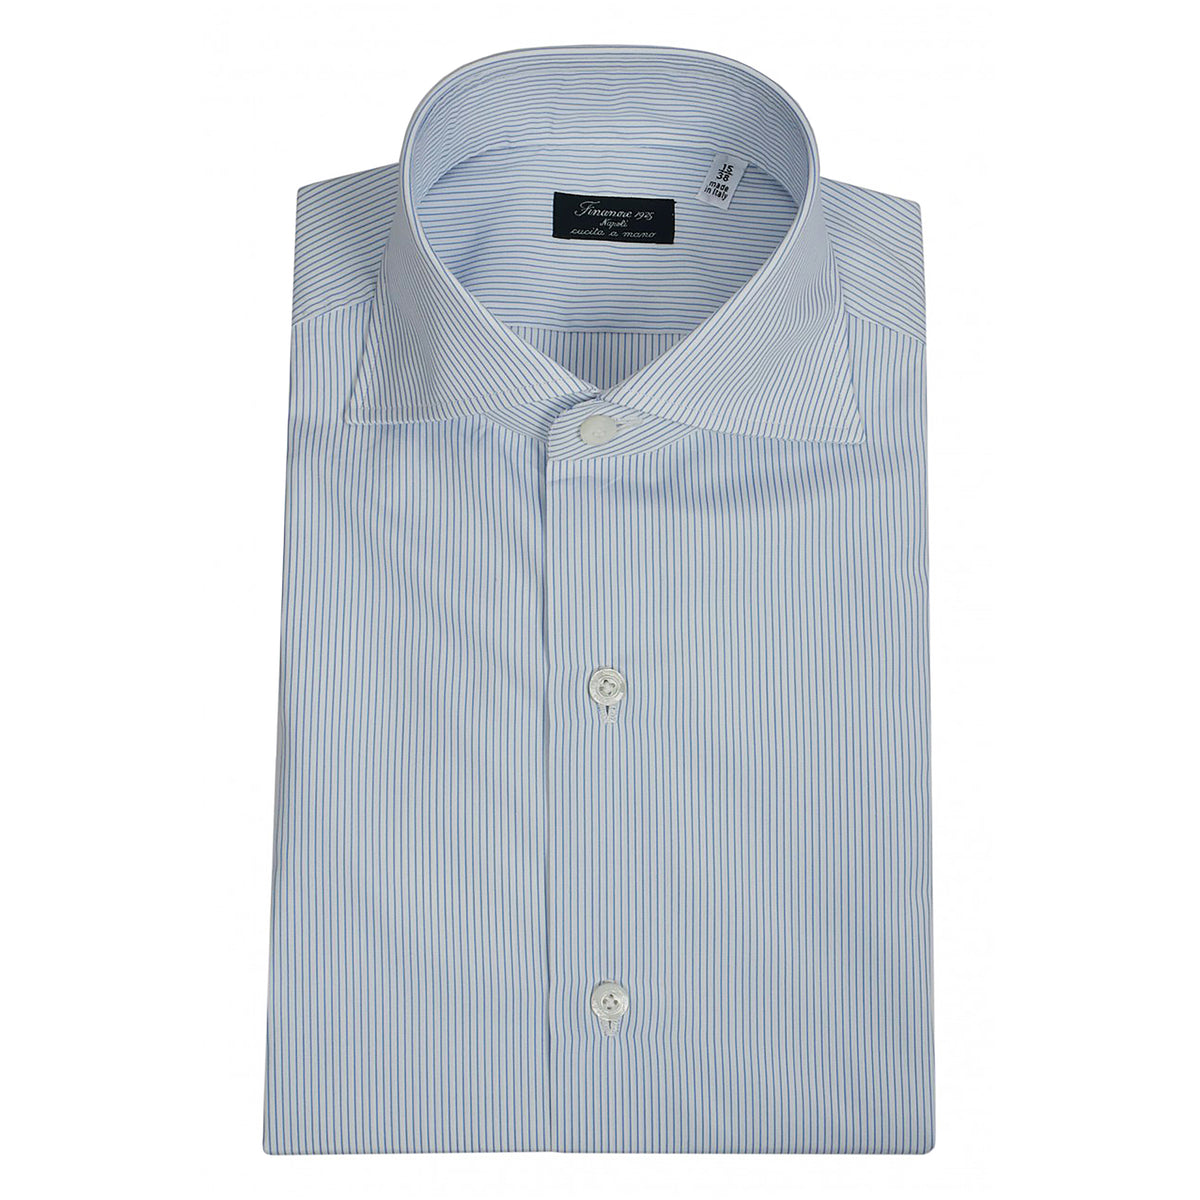 Dress classic Napoli striped shirt light blue collar with removable slats. Finamore 1925